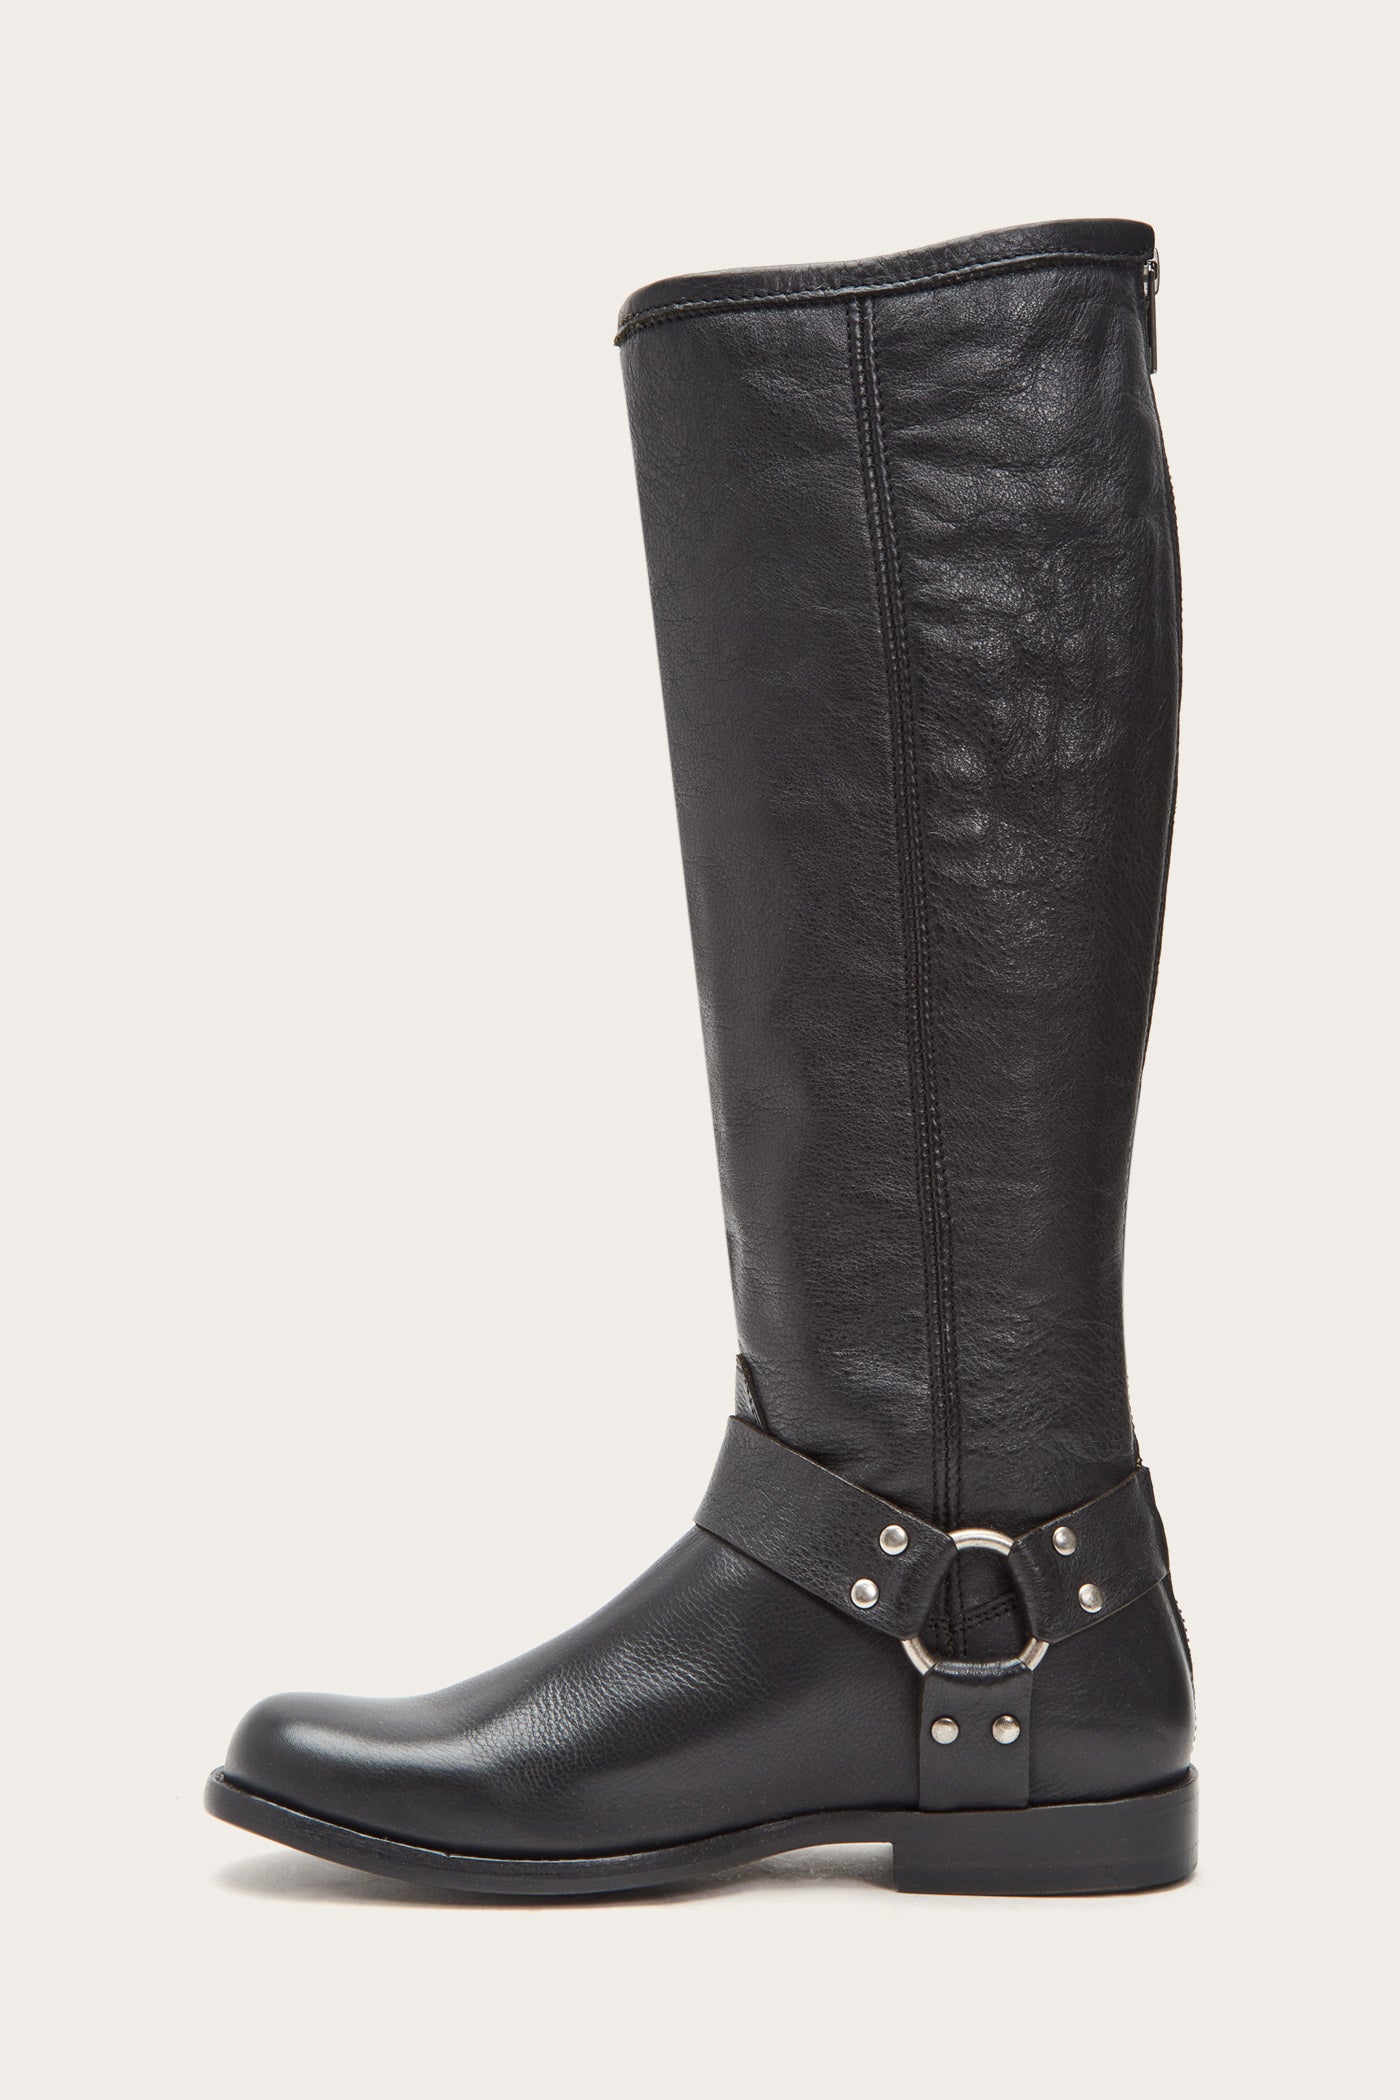 frye phillip harness tall boots